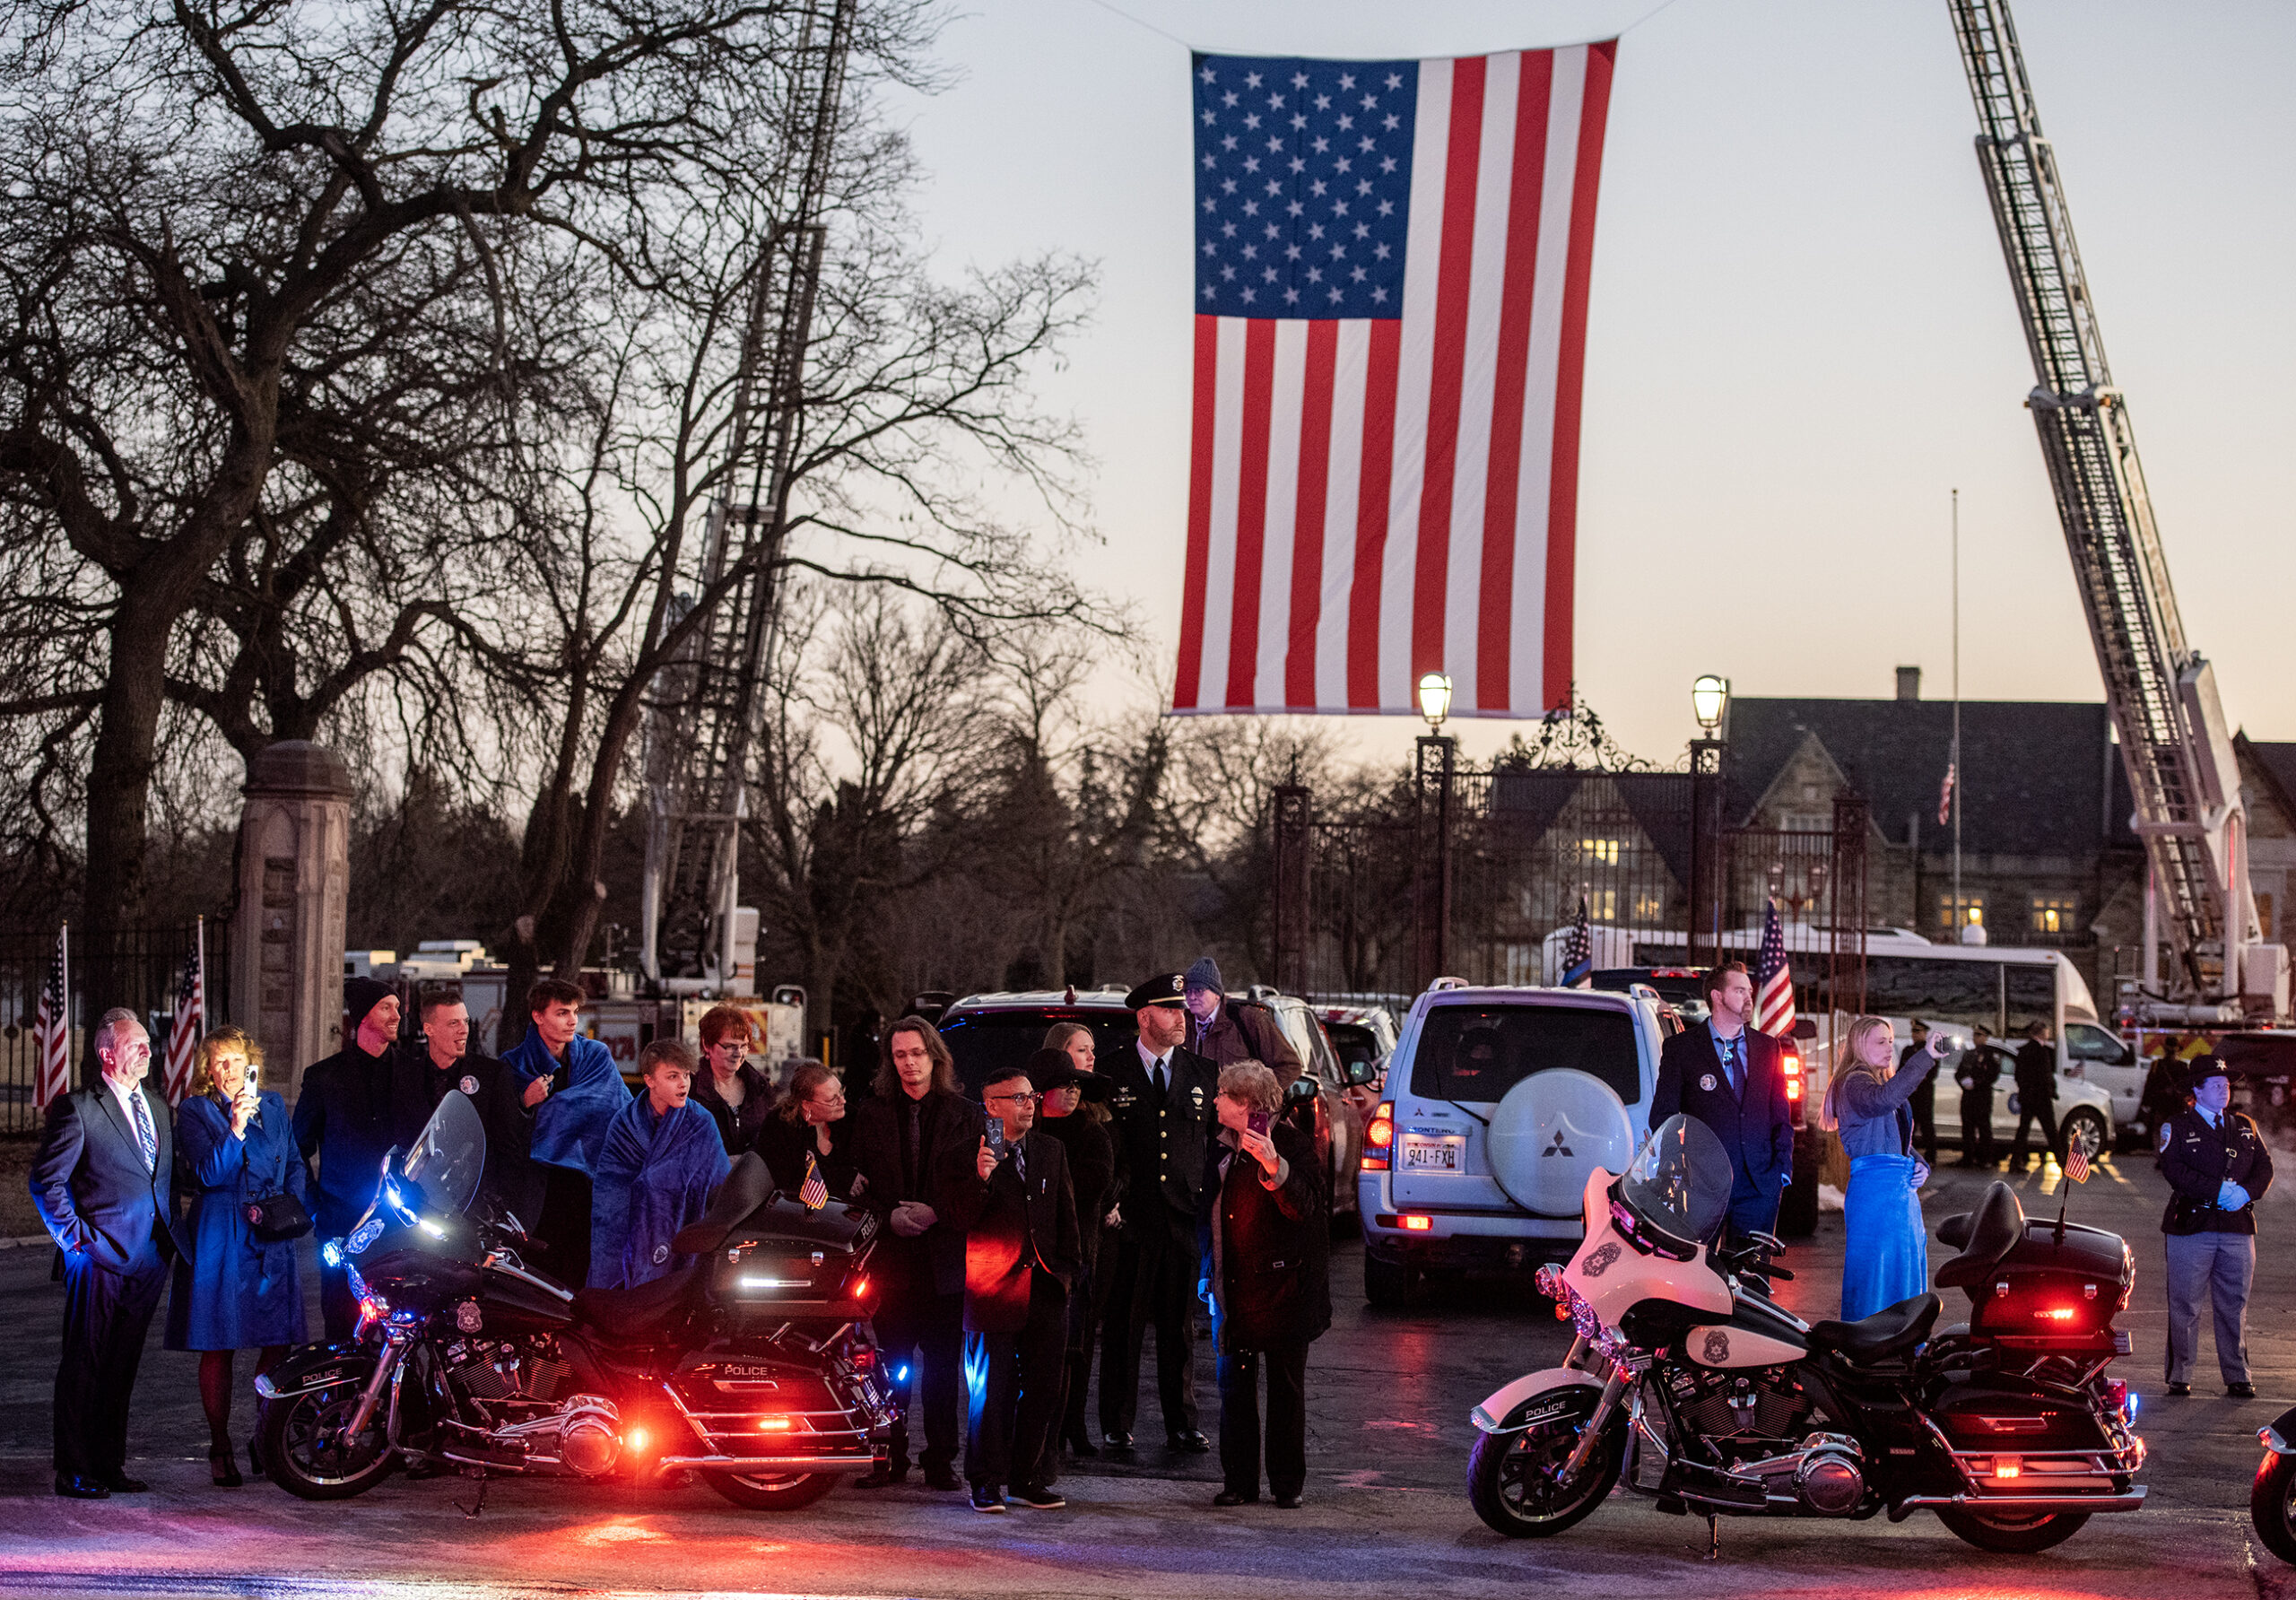 A large U.S. flag is displayed at a cemetery. People gather to watch the procession.